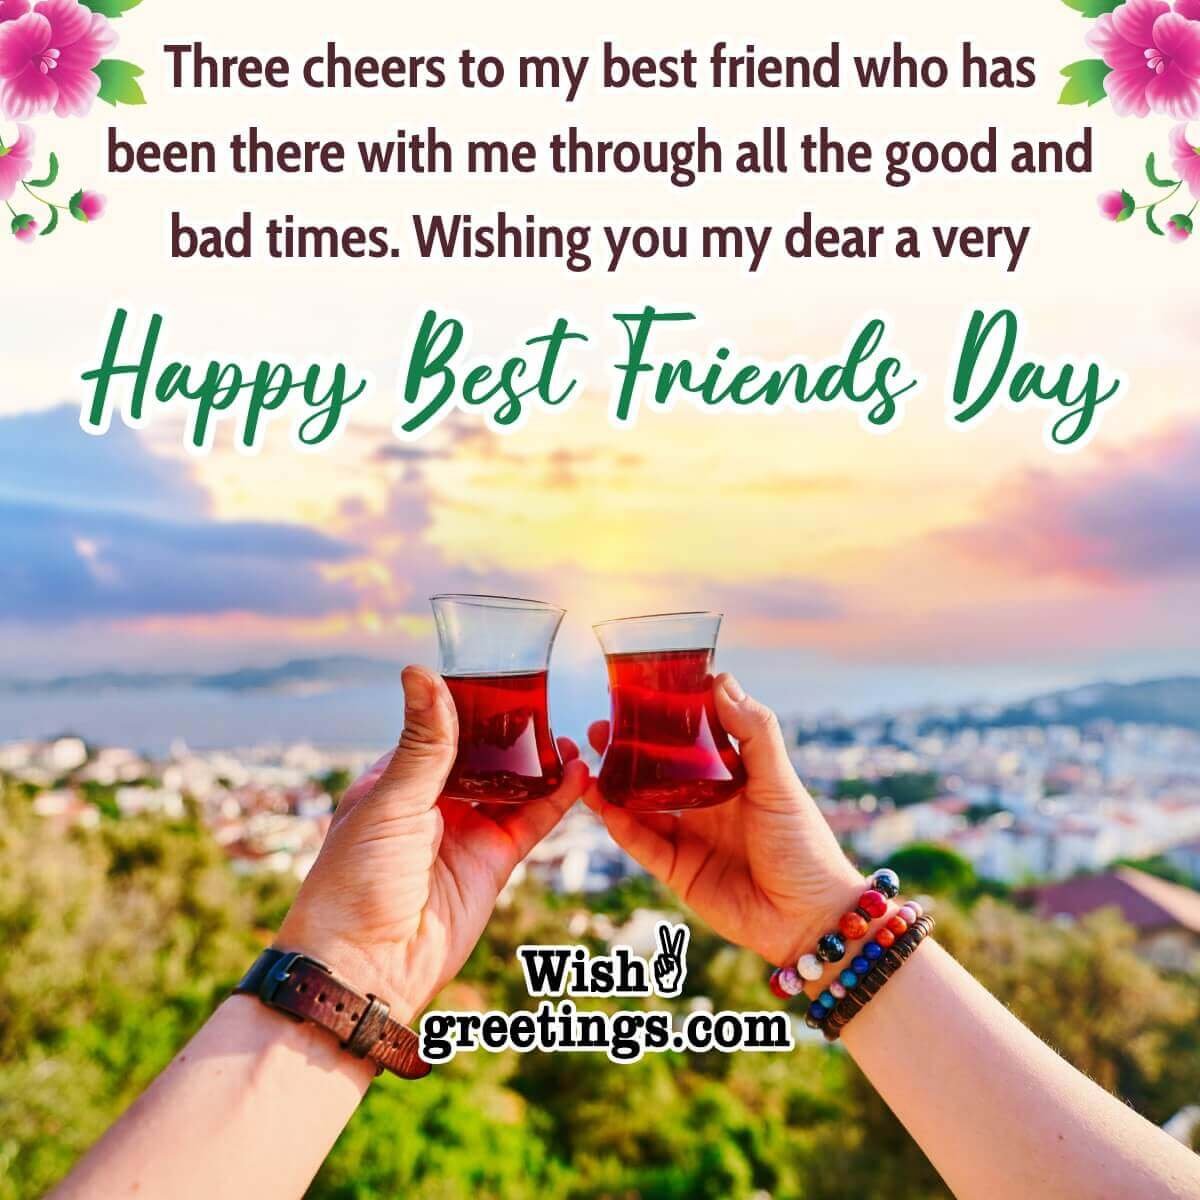 Best Friends Day Wishes Messages - Wish Greetings